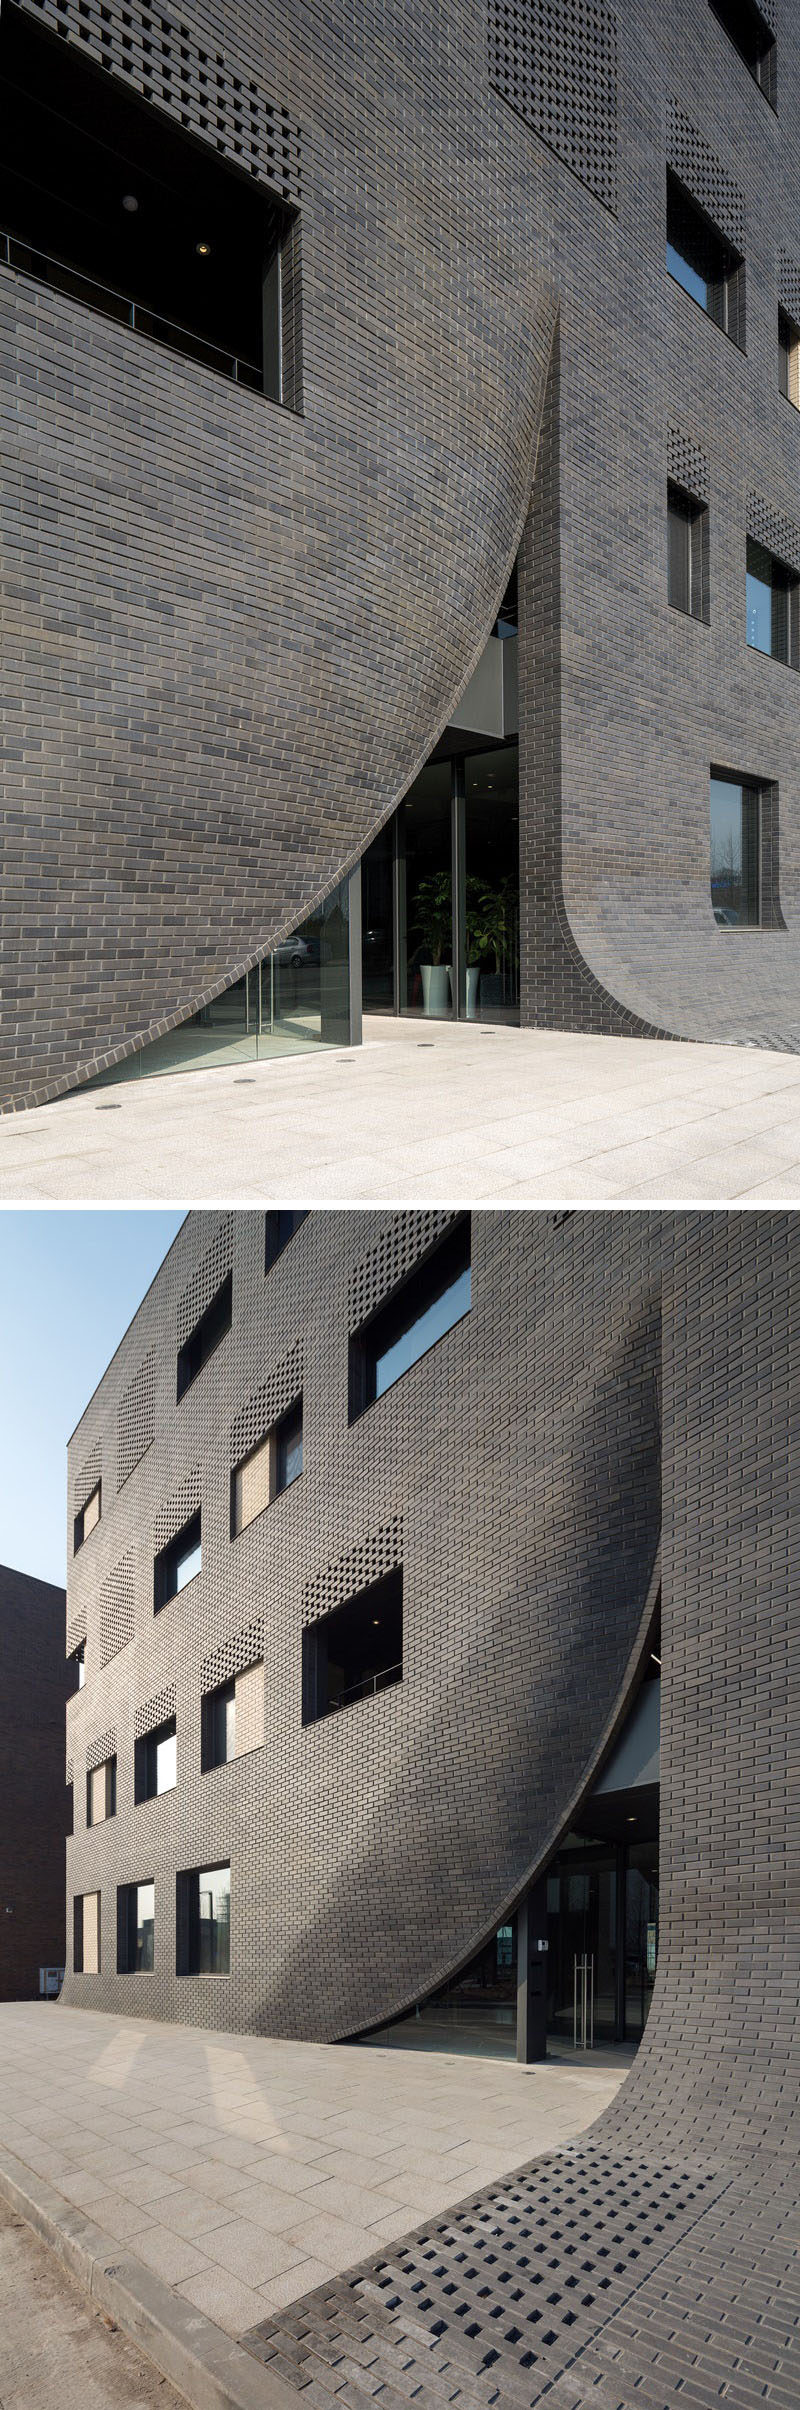 This black brick building has a 'crack' in it to reveal the entrance.